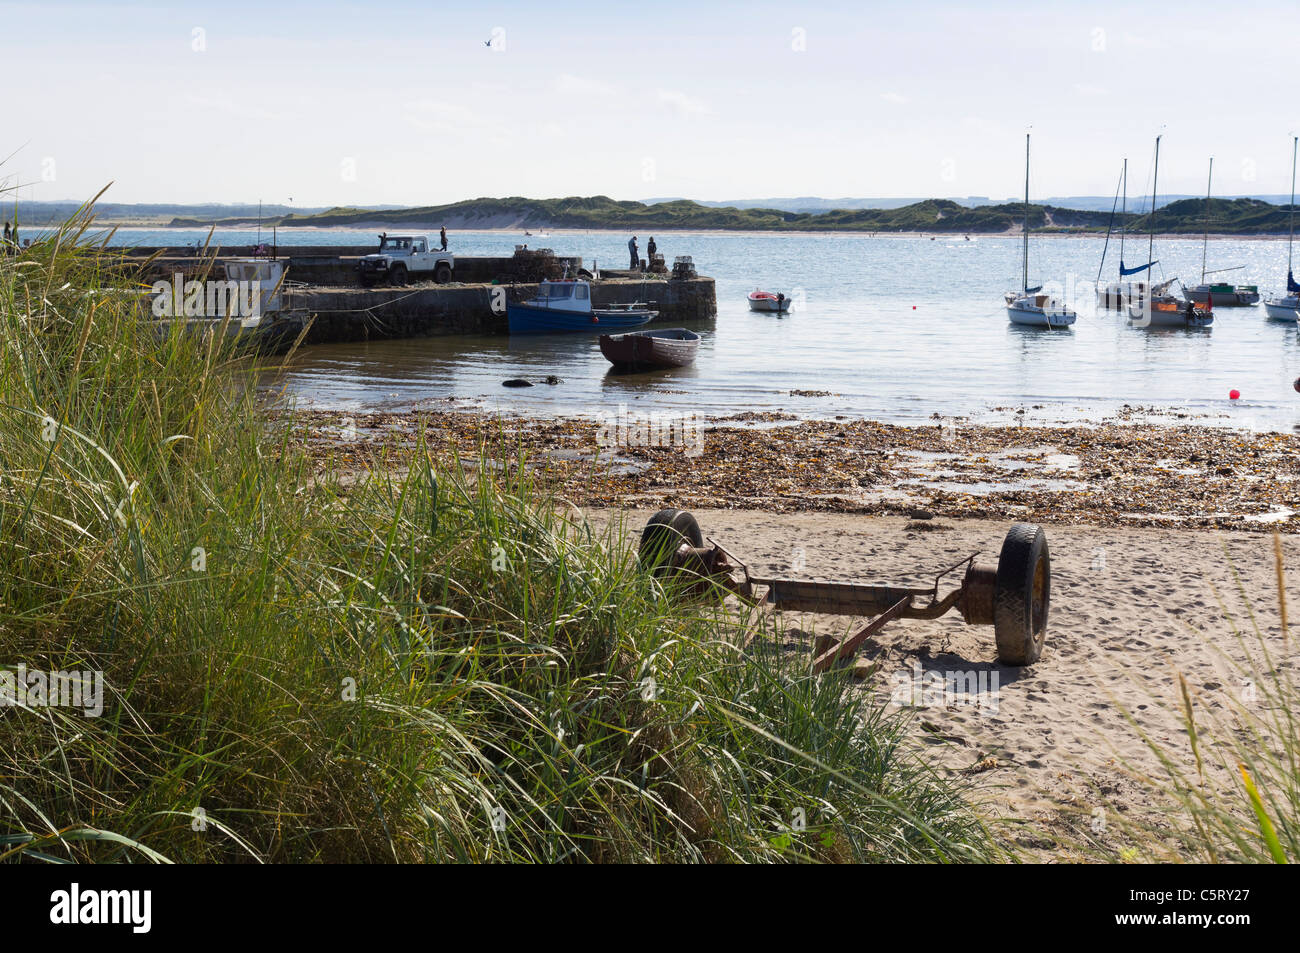 Beadnell, Northumberland, a beautiful undiscovered small fishing village with a harbour facing west over an enclosed bay. Stock Photo